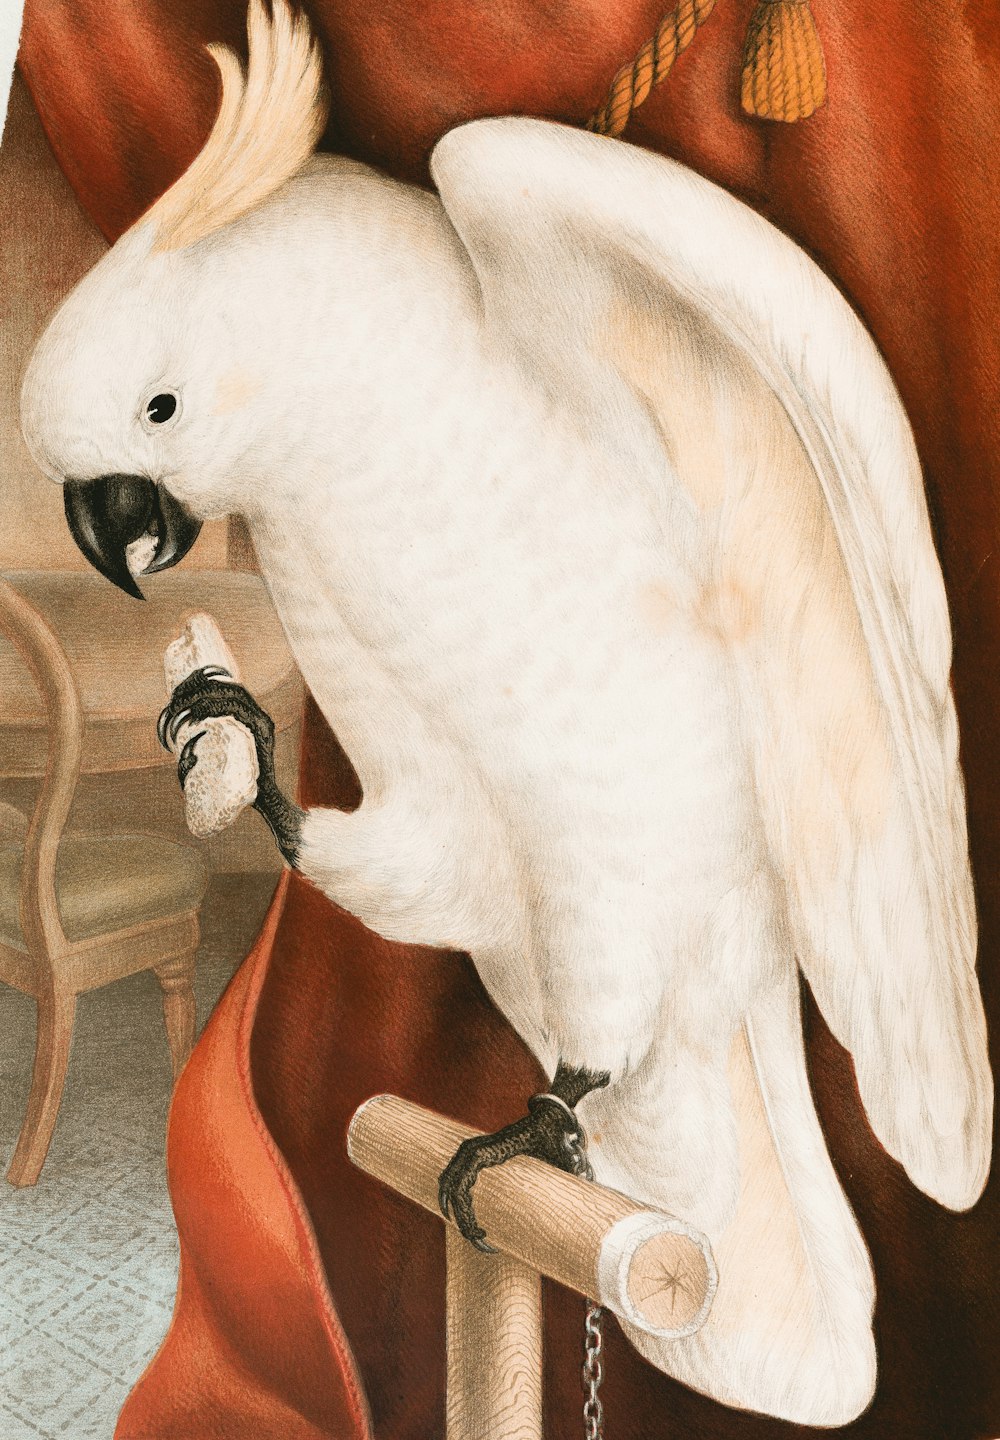 white bird on brown wooden table